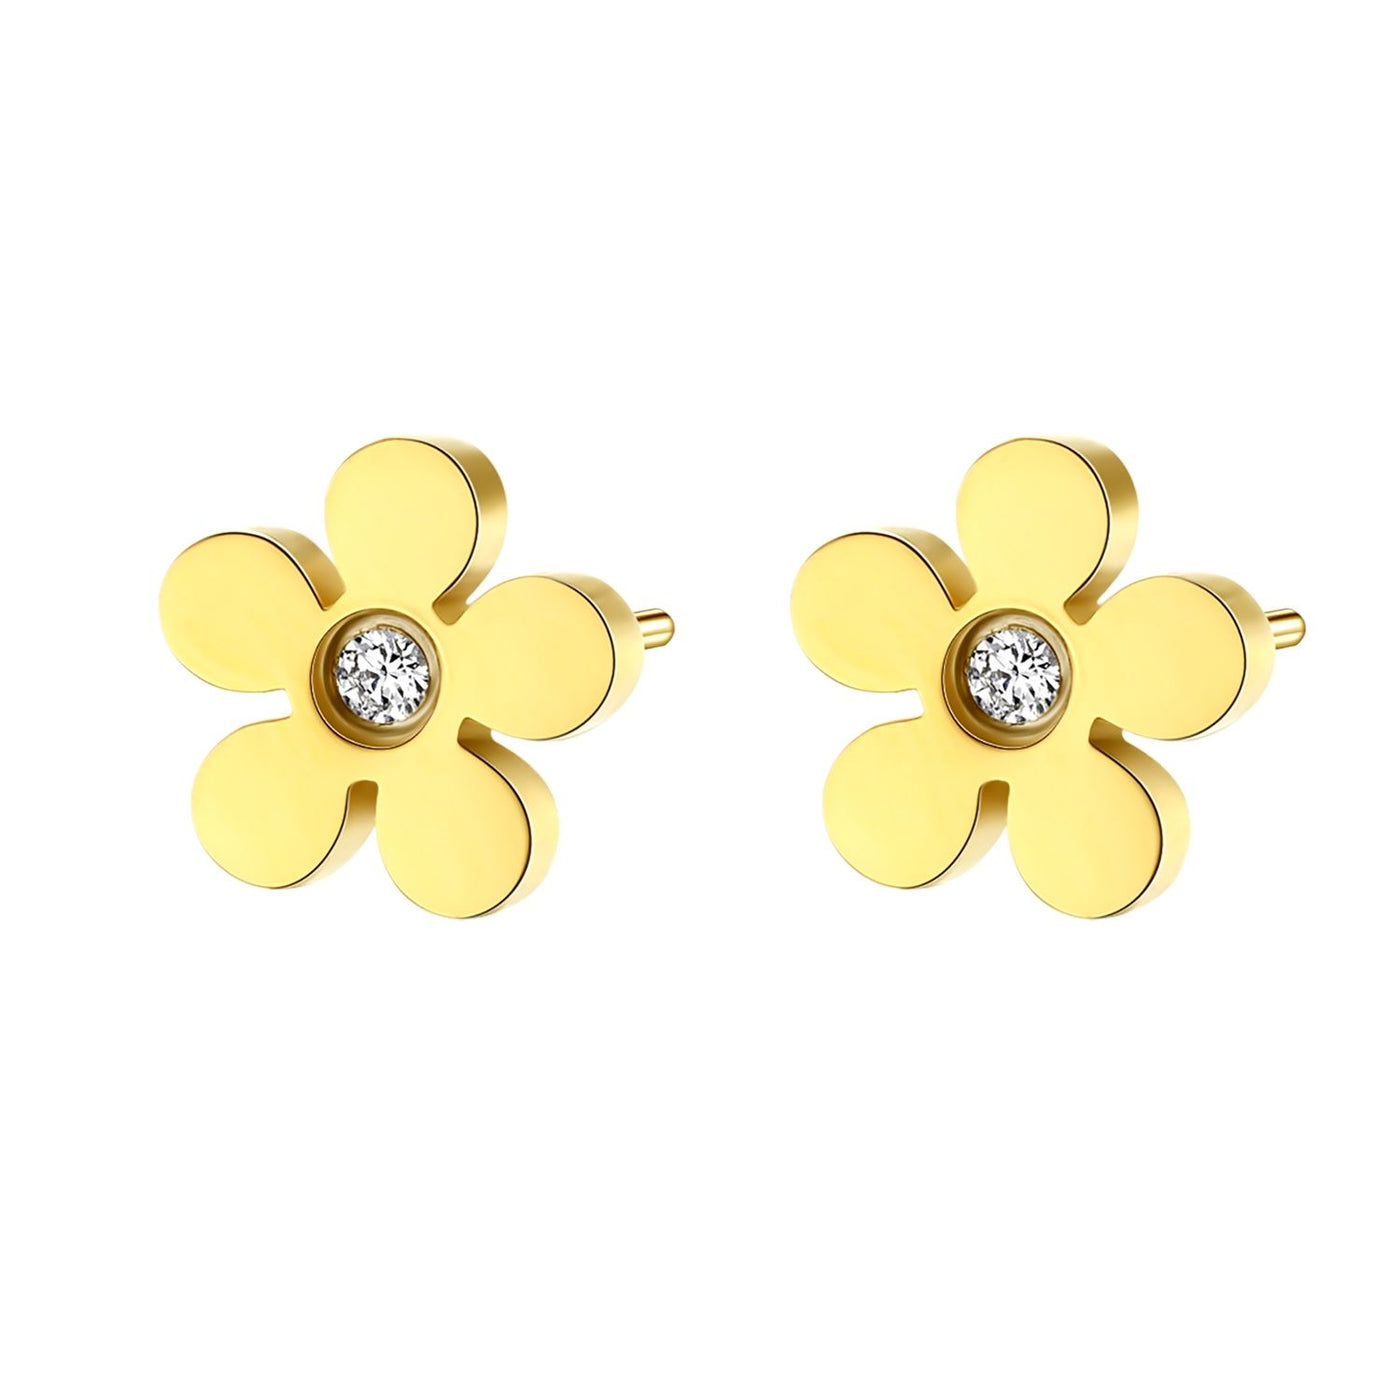 Forget-Me-Not Stud Earrings Gold